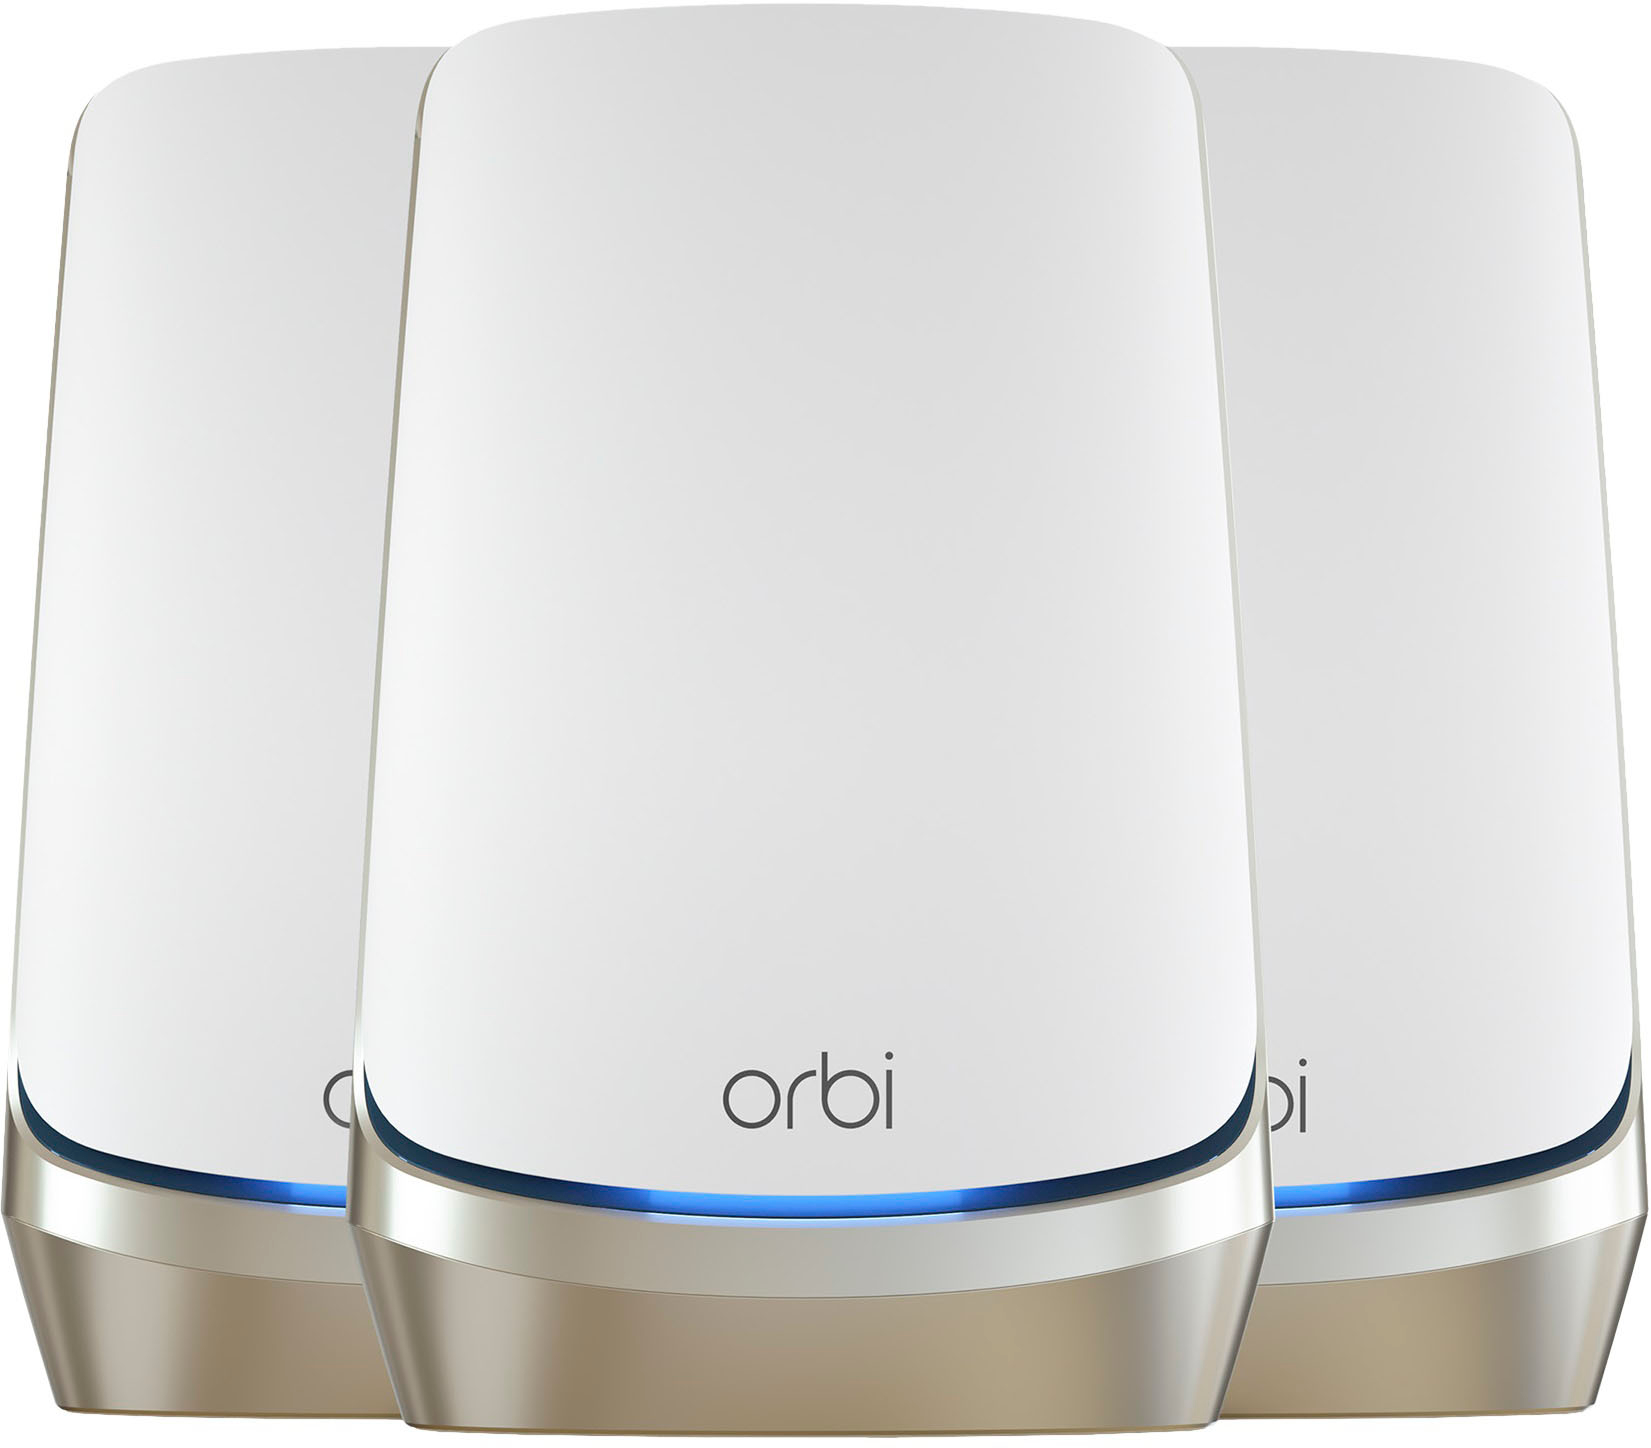 Netgear Orbi AXE11000 review: A mighty mesh router that's more than you  need - CNET